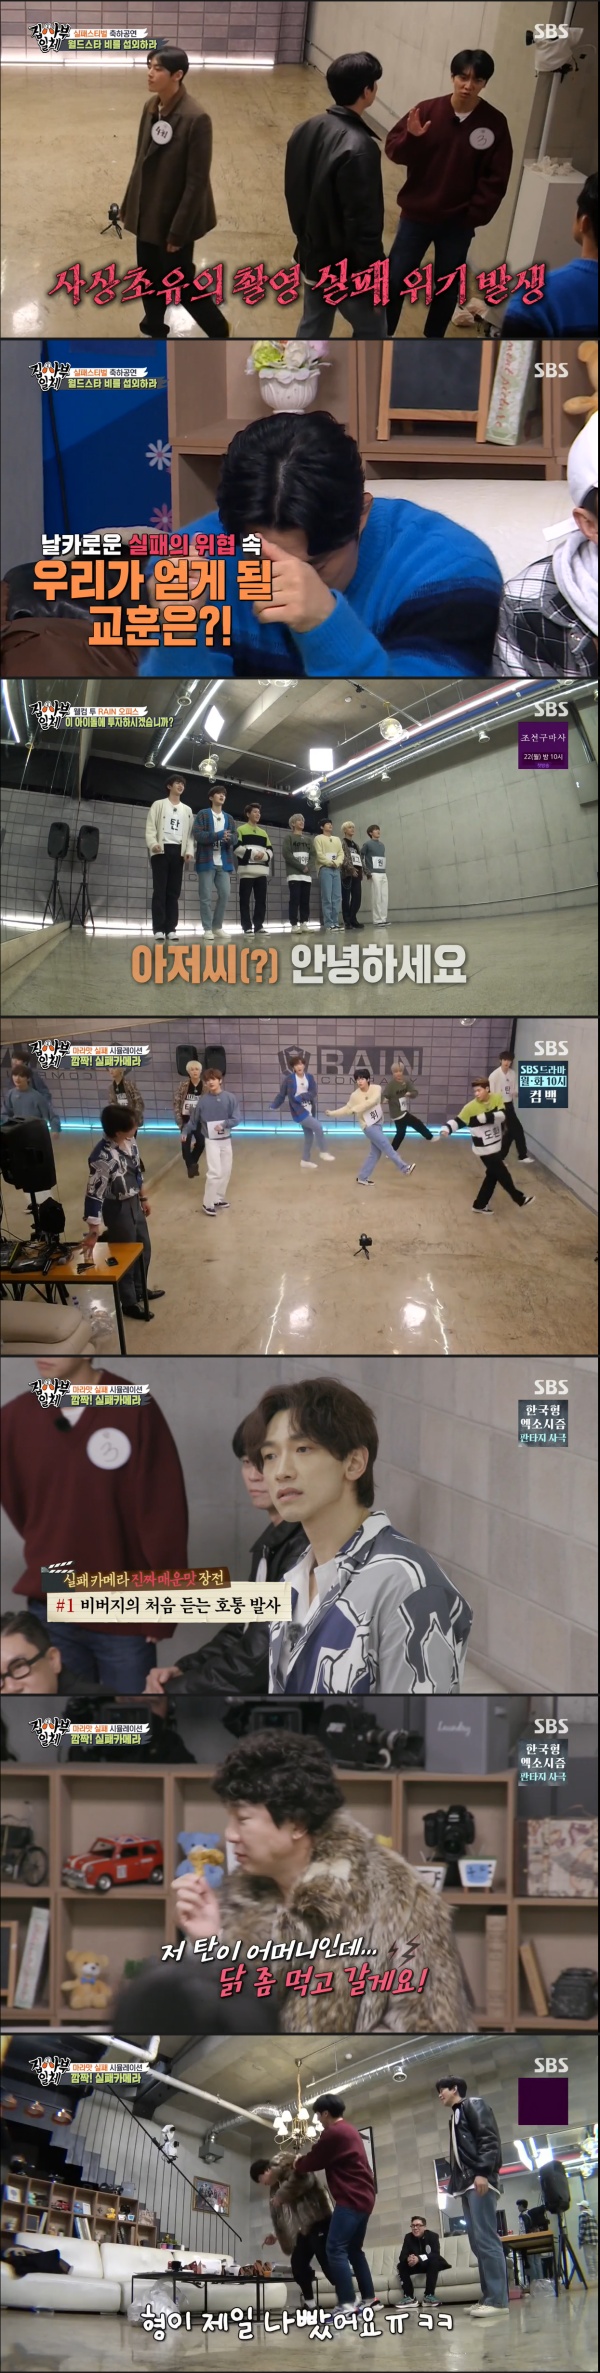 Rain has YG Entertainment for his idols Cypher and Candid Camera.On SBS All The Butlers broadcast on the 14th, Tak Jae-hun, Lee Sang-min and Rain appeared.Ive failed so much since high school, actually, some of them have made their debuts as idols in the past, Rain said.Rain said: When you live, you can either succeed or fail any project; you have to simulate failure.I think about both the worst and the best when I release the album. Rain said, That way, you will not be afraid when you fail. On this day, the members of All The Butlers visited Rains house in person; however, the members were blocked from the front door and embarrassed.After contact, Rain and I were able to make a phone call, then Rain came out of the gate, saying, I have something to ask you, dont steal anything first, and laughing around.I am not living in this house, so please keep quiet.Members asked, Is there a wife at home now? and Rain joked, Dont ask me about your family, Im living together and Im trying to hide it.Rain said, Lets make a deal. In fact, there is an idol group I have produced. Seven people come out of the group for three years.Rain said, All of you here are seniors like Girasseng to the new idol, and I want you to look at it.In particular, Rain said, Jung Eun-woo is an idol senior and there is Lee Sang-min, a producer.Yang Se-hyeong said, If that happens, Cypher will appear on the air before his debut.Lee Sang-min said, From the point of view of the producer, I made a very big request.Lee Sang-min asked, If Jung Eun-woo is good at mathematics and Rain is evaluating a newcomer in exchange for a celebration performance, is it a benefit? Jung Eun-woo replied, We seem to be about 77 times better.Yang Se-hyeong put his legs on his desk and said, So will we sit down a little?On this day, Cypher had time to introduce his debut song Do not Do in front of the member.But Cypher member Tan made a choreography mistake from the first start in a tense mind, leaving Rain furious; after stopping the stage, Rain ordered the stage again.Cyphers member Tan made another mistake in the centre; eventually Rain cut off the song again, and Tan bowed his head.Lee Seung-gi stopped filming, suggesting Lets take a break.Rain, who had called Cypher outside, said, What are you doing? Then Rain called Tan separately and started talking, but then he laughed.Then he joined Tak Jae-hun and followed the choreography and couldnt stop laughing; in fact, it was Rains Candid Camera for the members.Later, the members who learned the truth swept their hearts, saying, I did not really know. Yang Se-hyeong confessed to Lee Sang-min, This is the first time I have broadcast this.On the other hand, SBS All The Butlers is broadcast every Sunday at 6:30 pm.